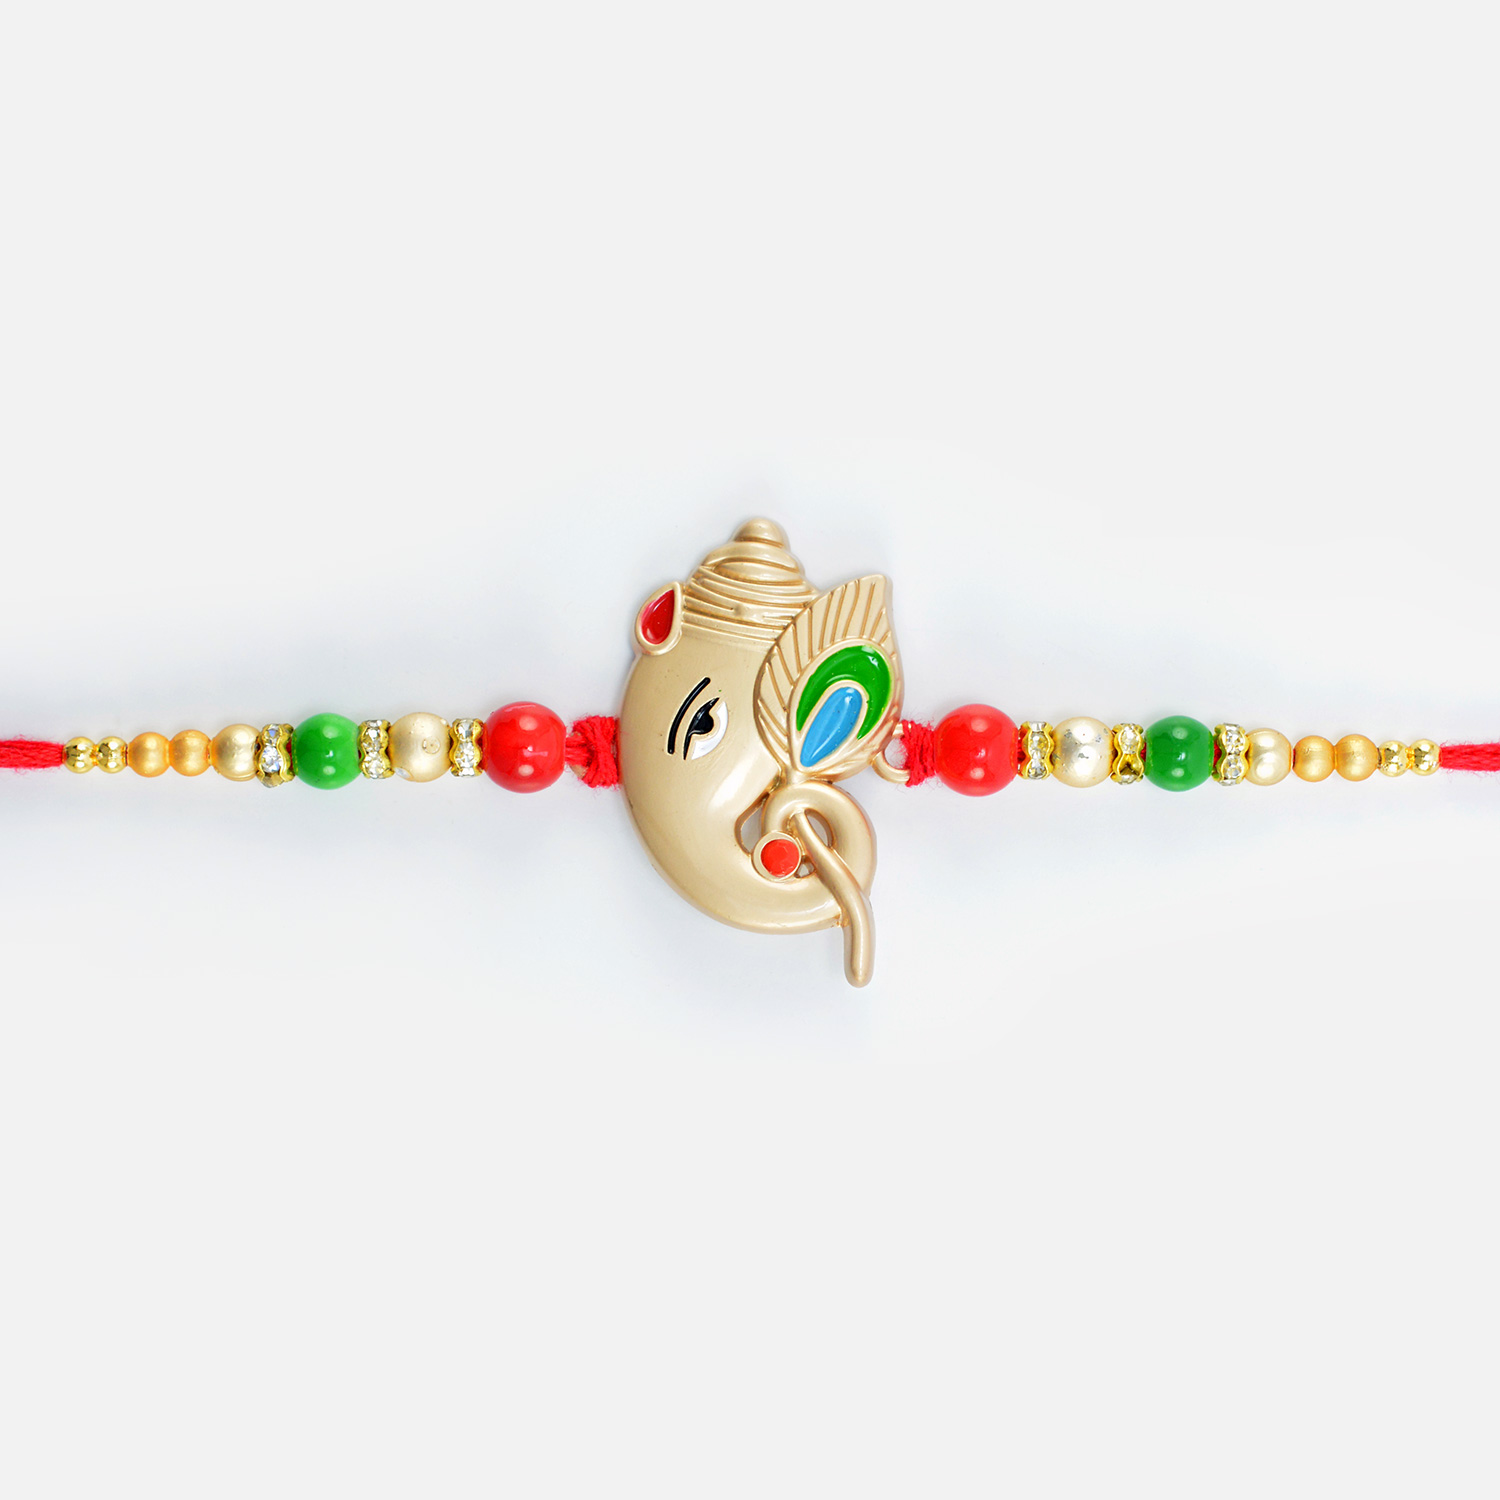 Newly Design Attractive Looking Lord Ganesha Auspicious Rakhi for Brother